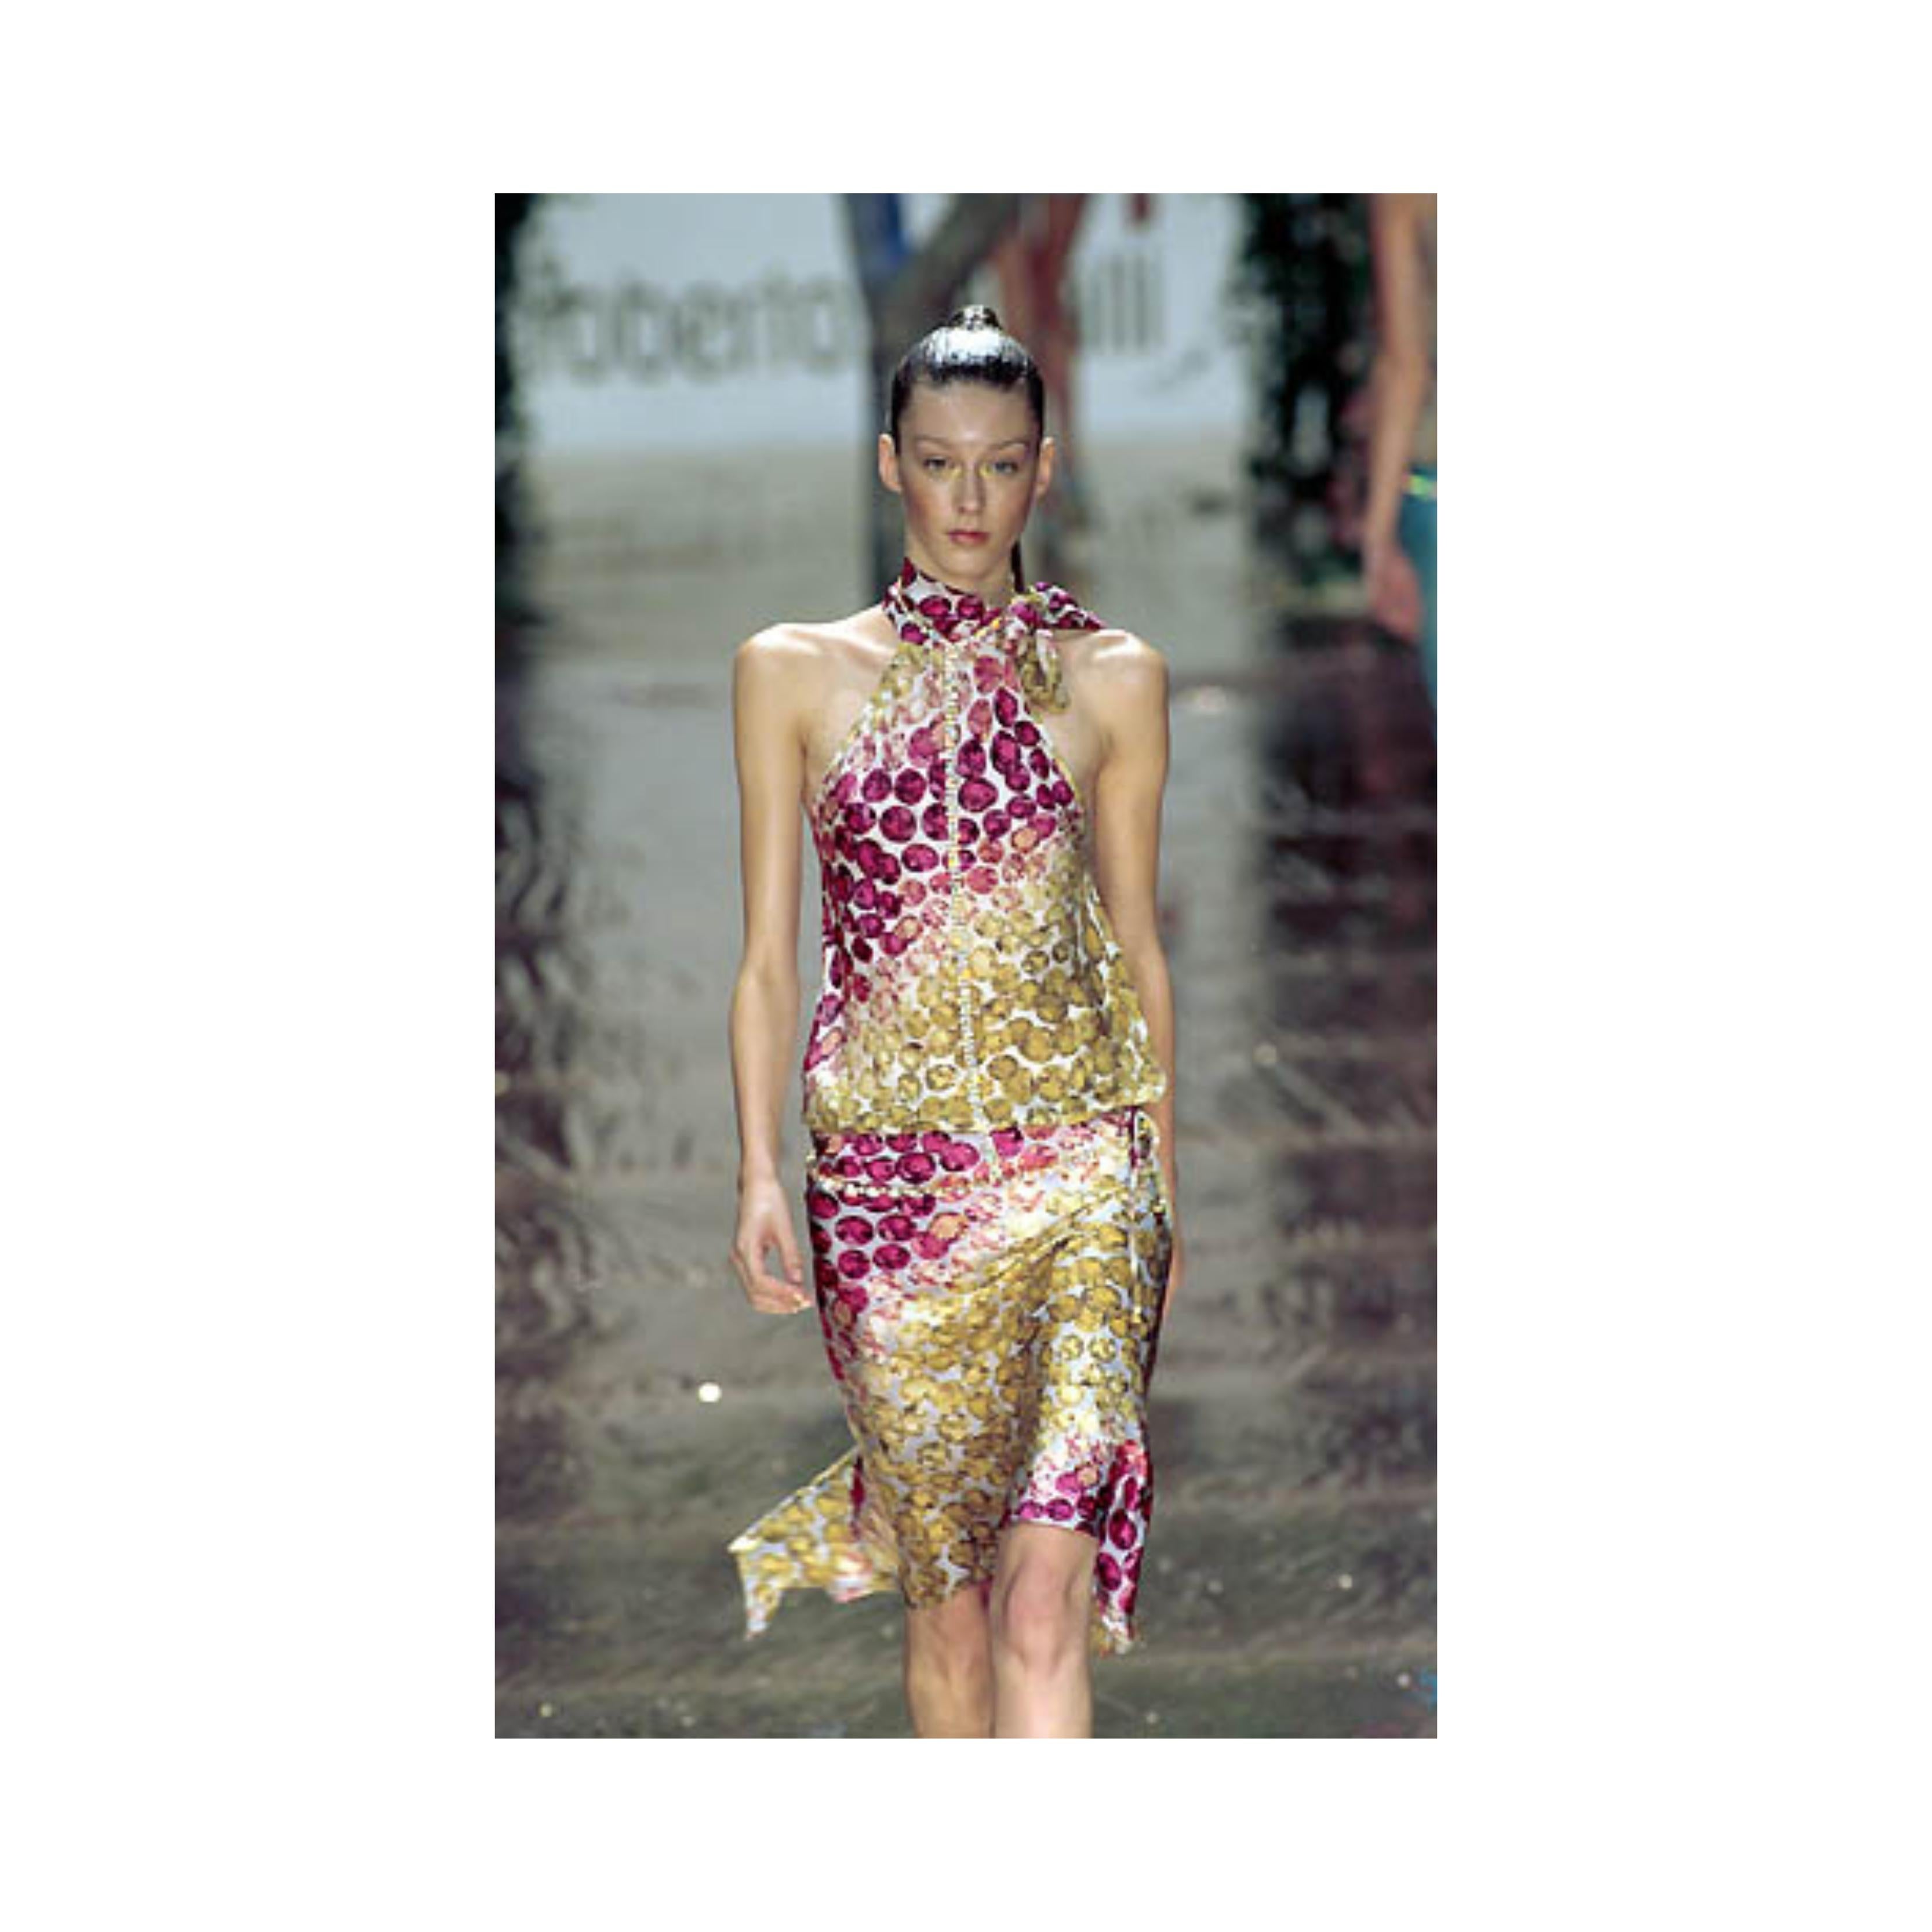 From the 2000s runway collection by Roberto Cavalli, this two-piece set features diamond jewel prints in pink and gold and is crafted from silk. The skirt has a gemstone on chain detailing and elastic on the waist. It falls gracefully on two sides,